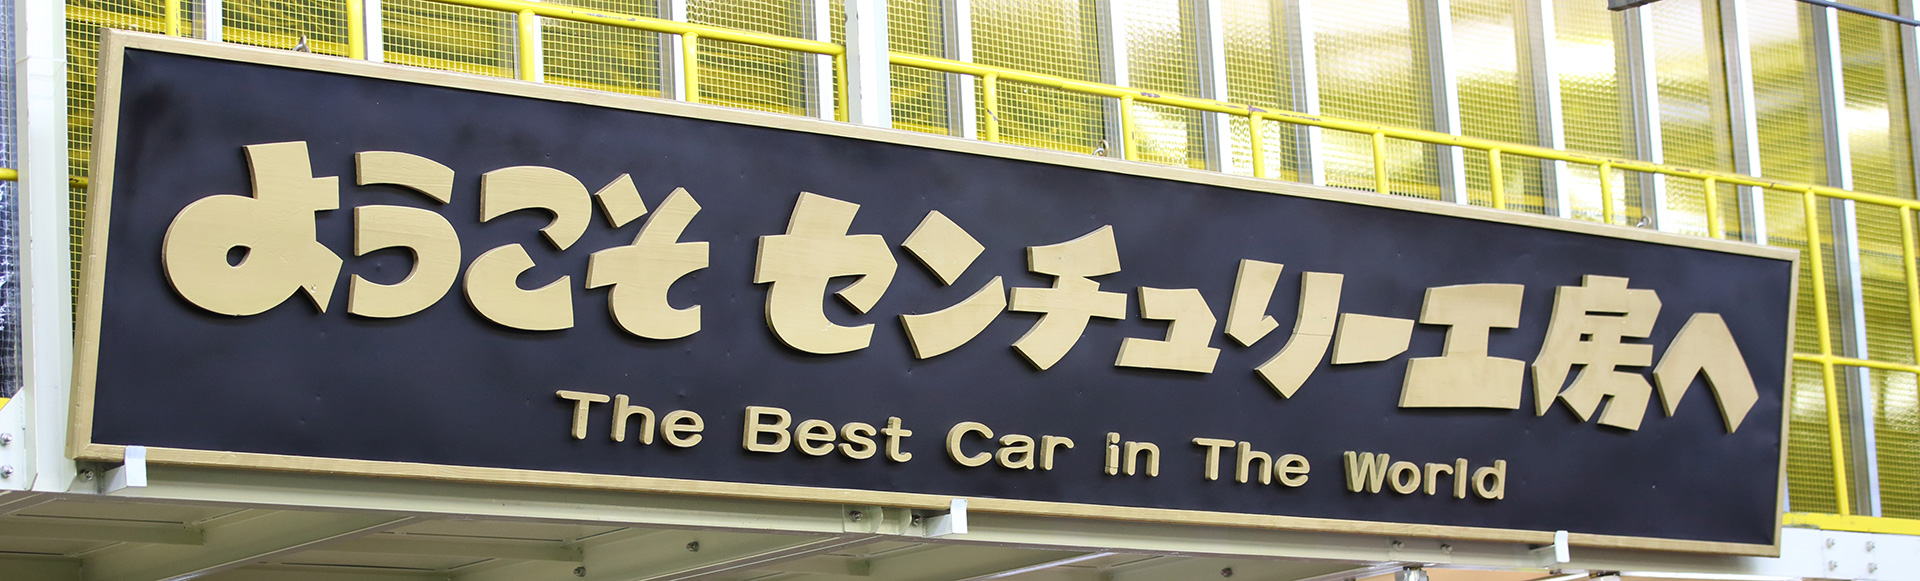 The master craftsmanship of the Century, Japan's only chauffeur-driven car